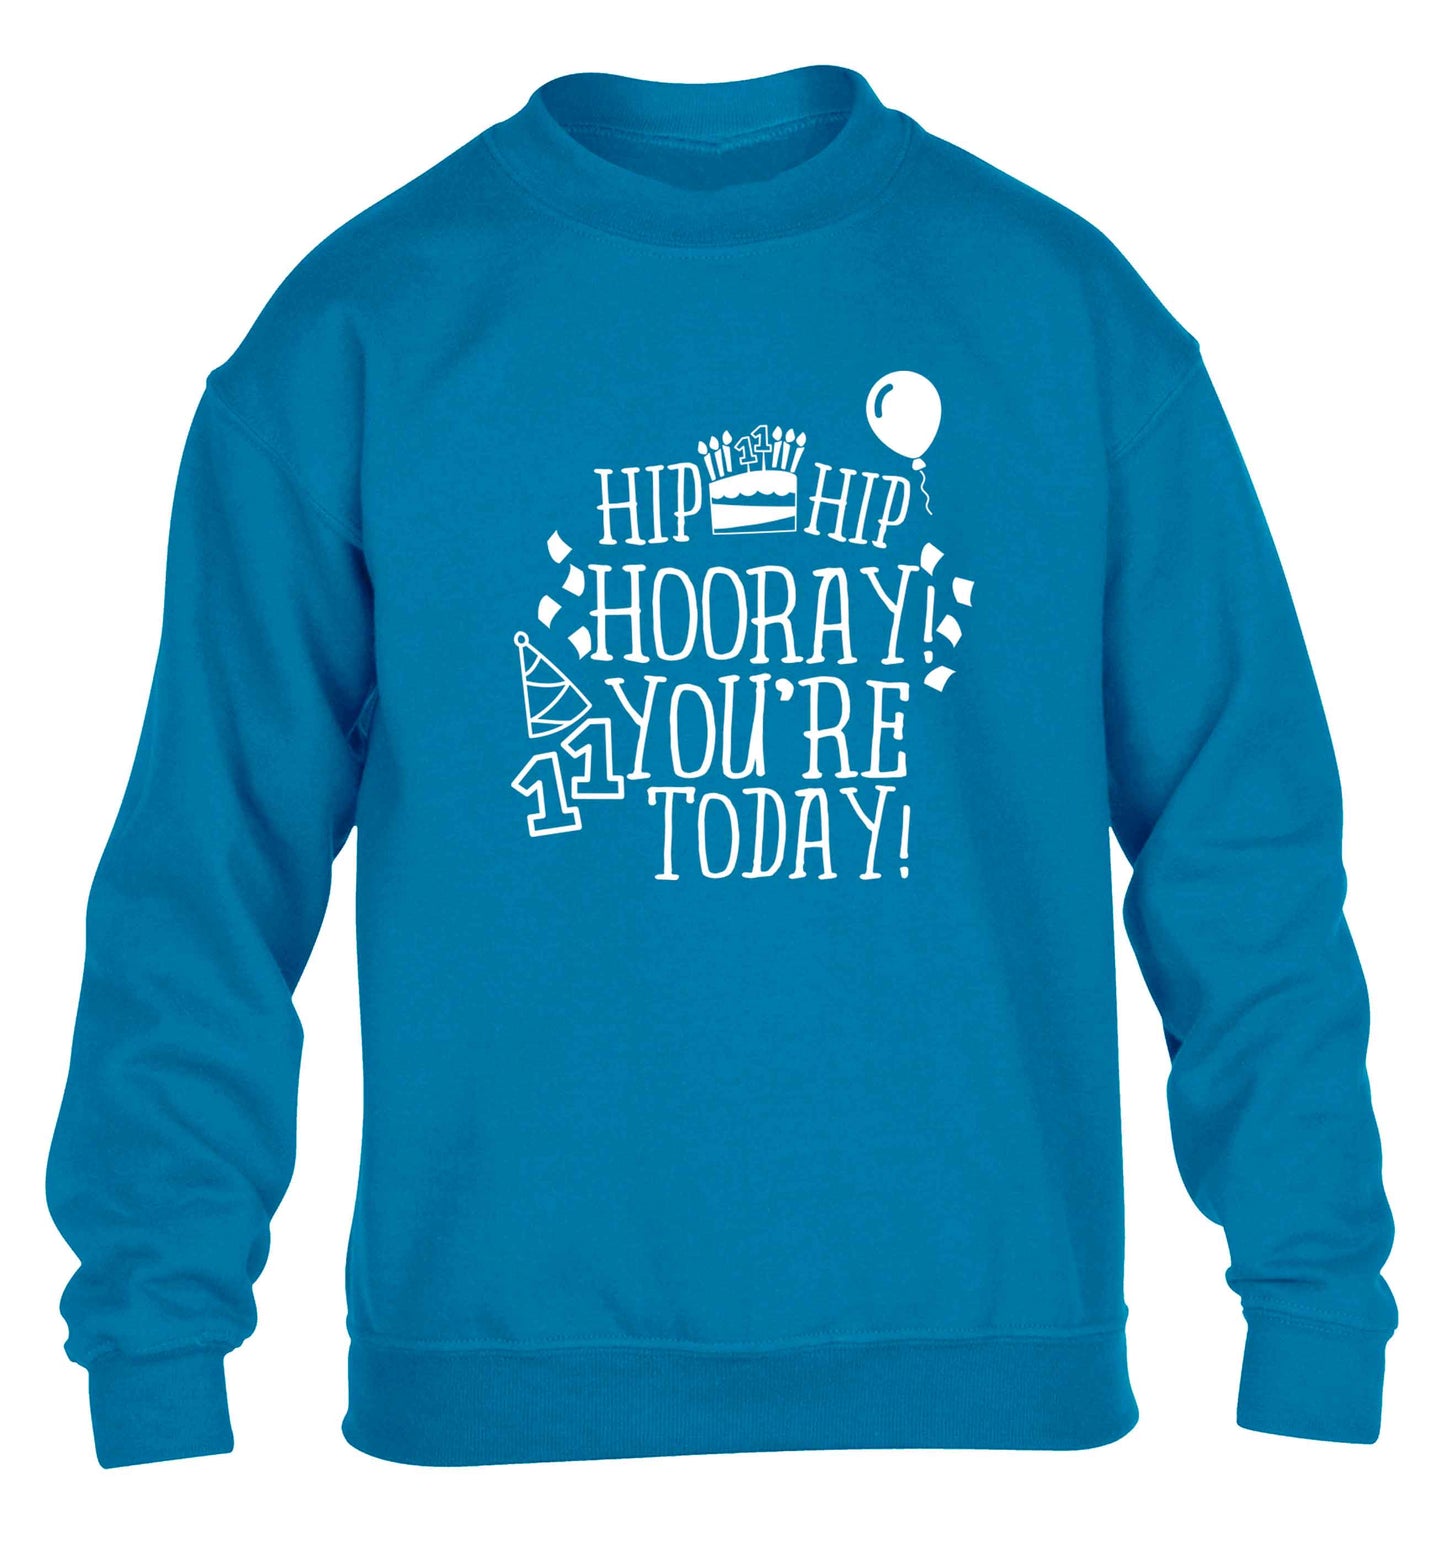 Hip hip hooray I you're eleven today! children's blue sweater 12-13 Years